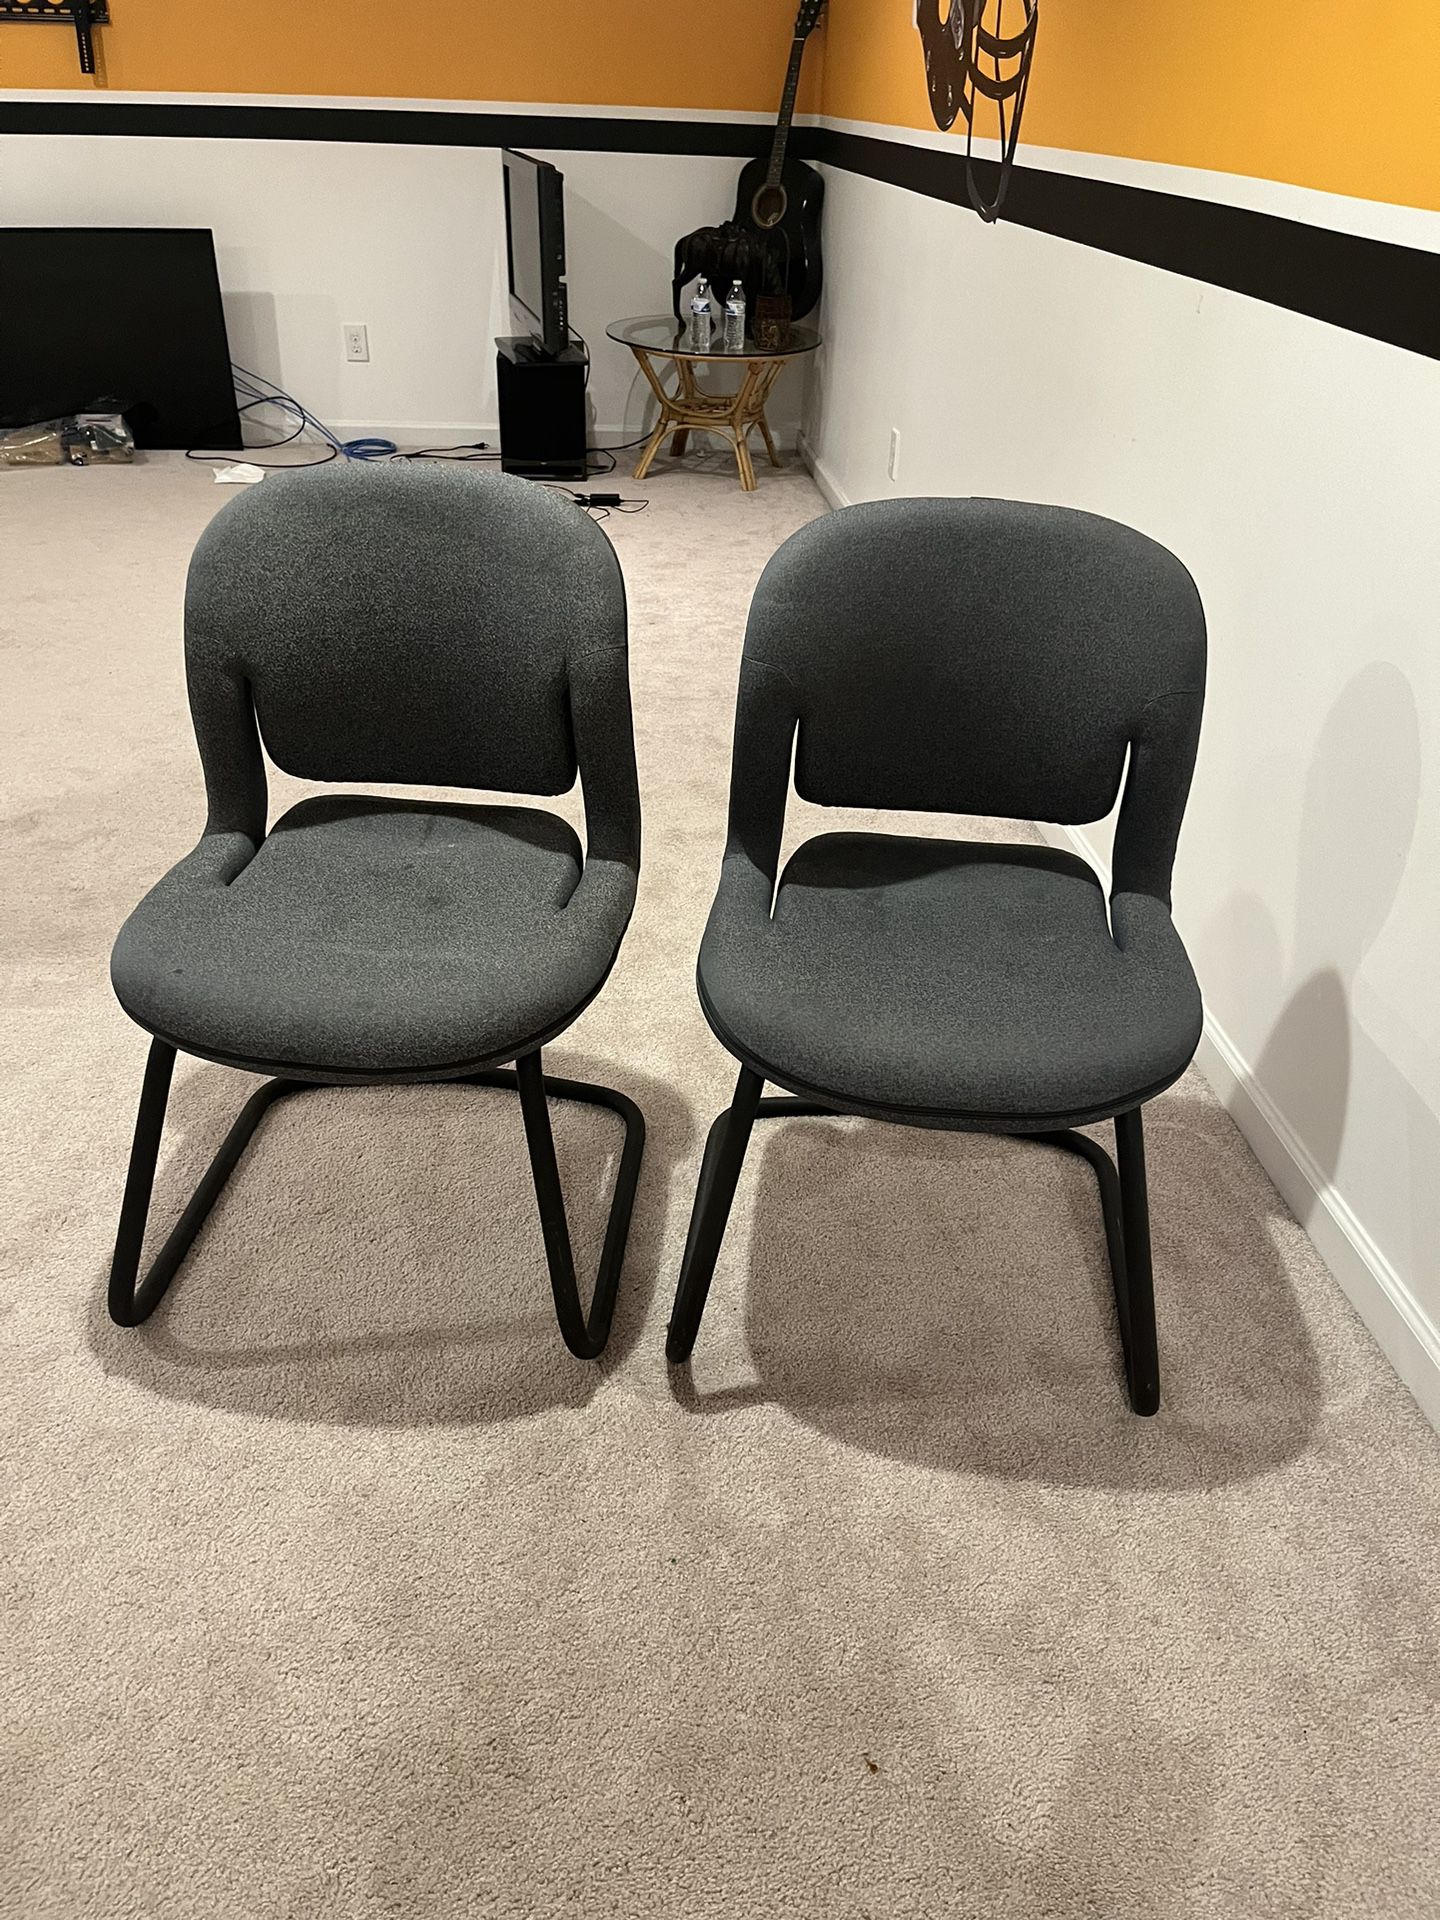 2 Chairs For Sale Each Piece 10$